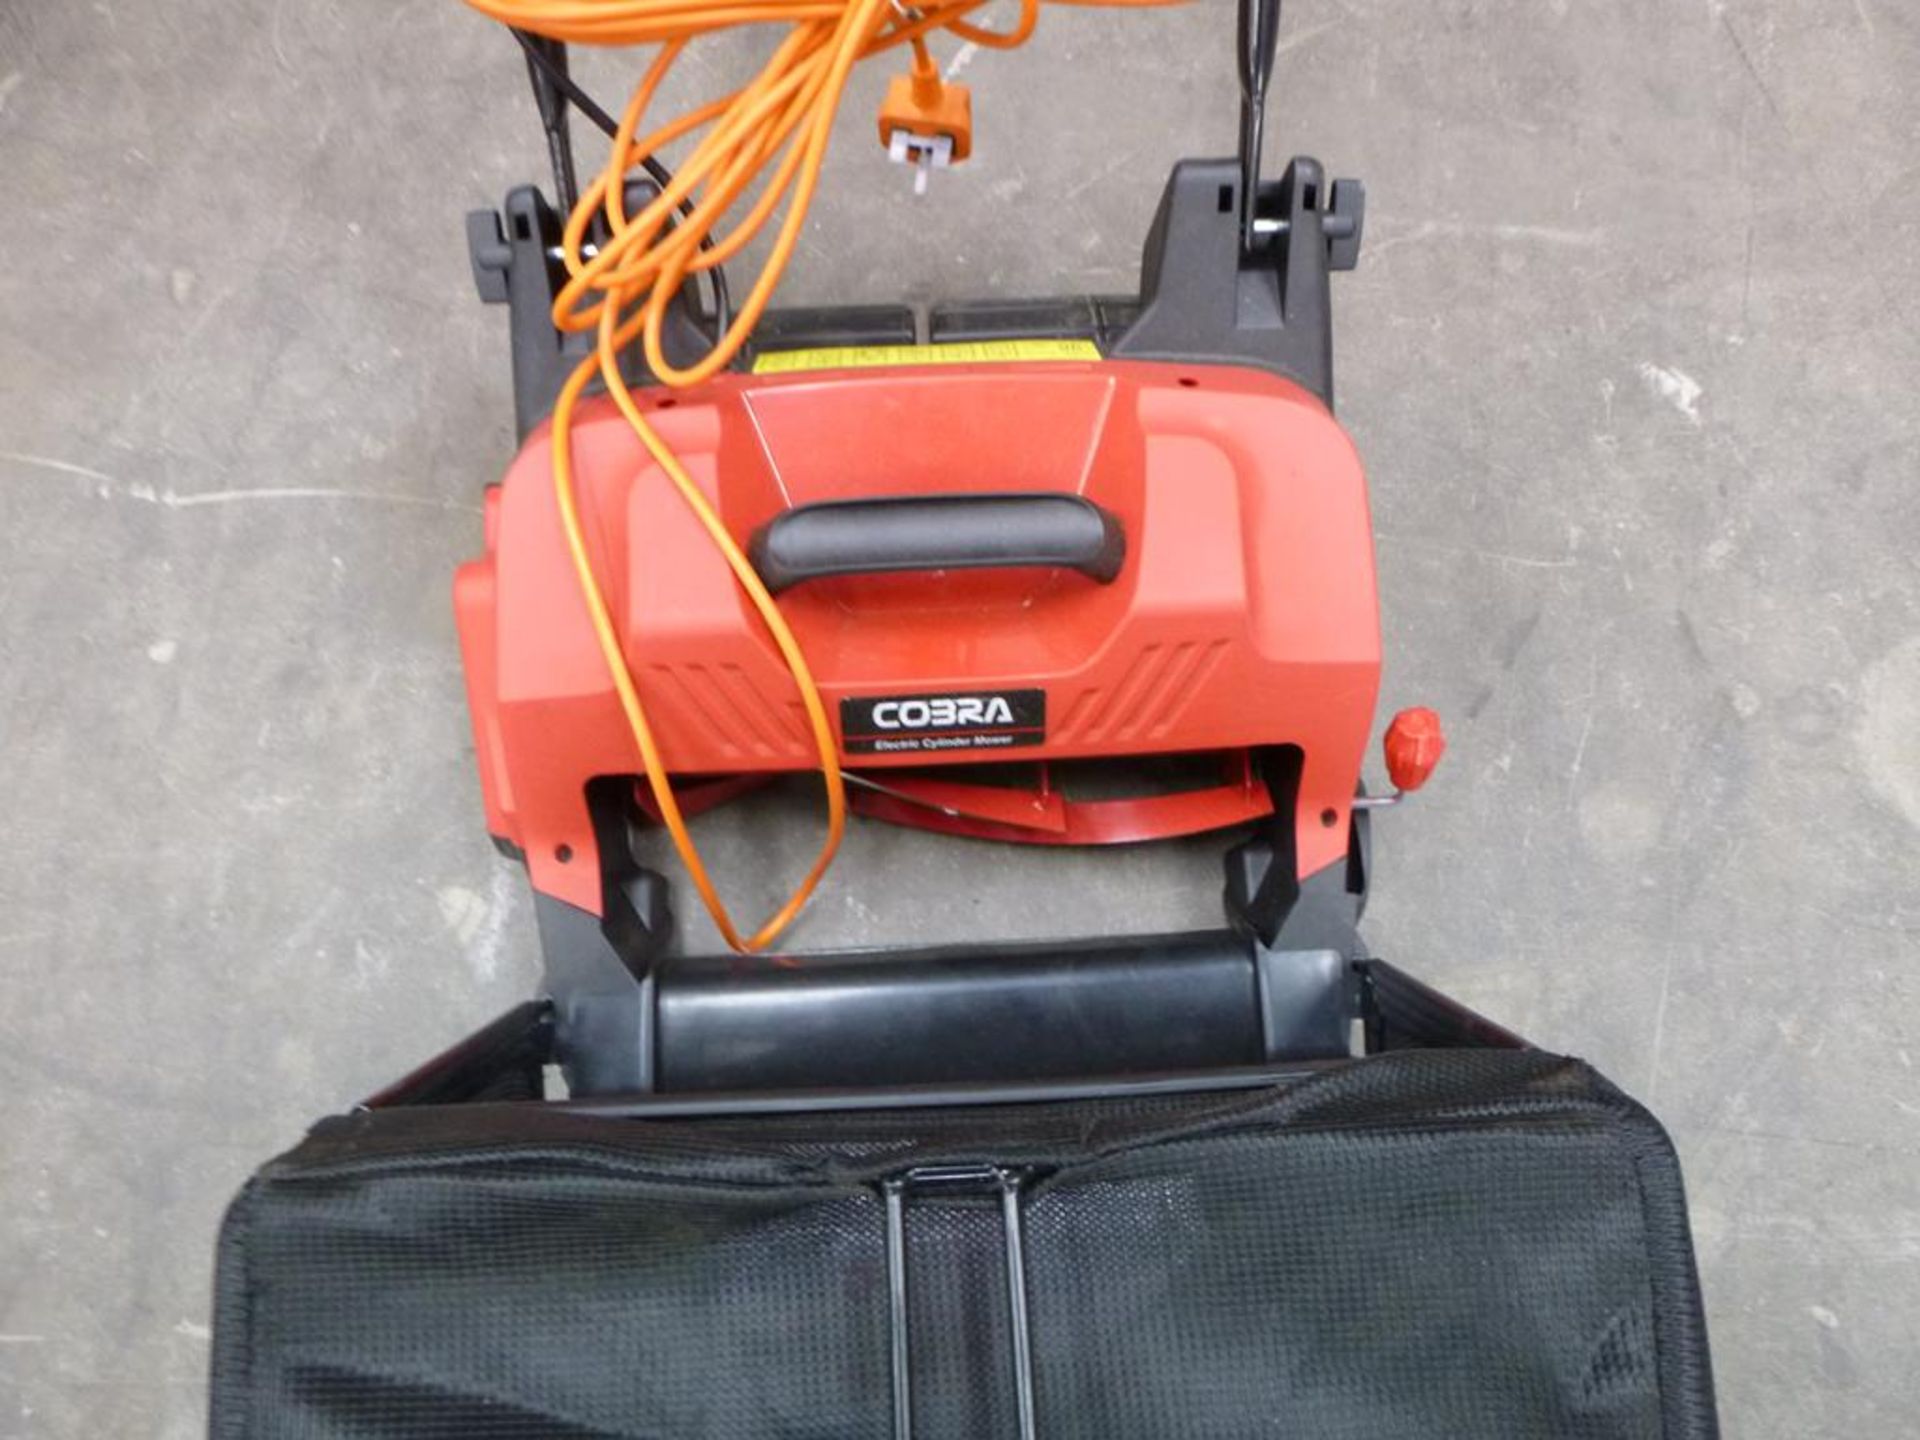 Ex Display Cobra Electric Cylinder Lawnmower CM32E. Shop Price £69 - Image 2 of 3